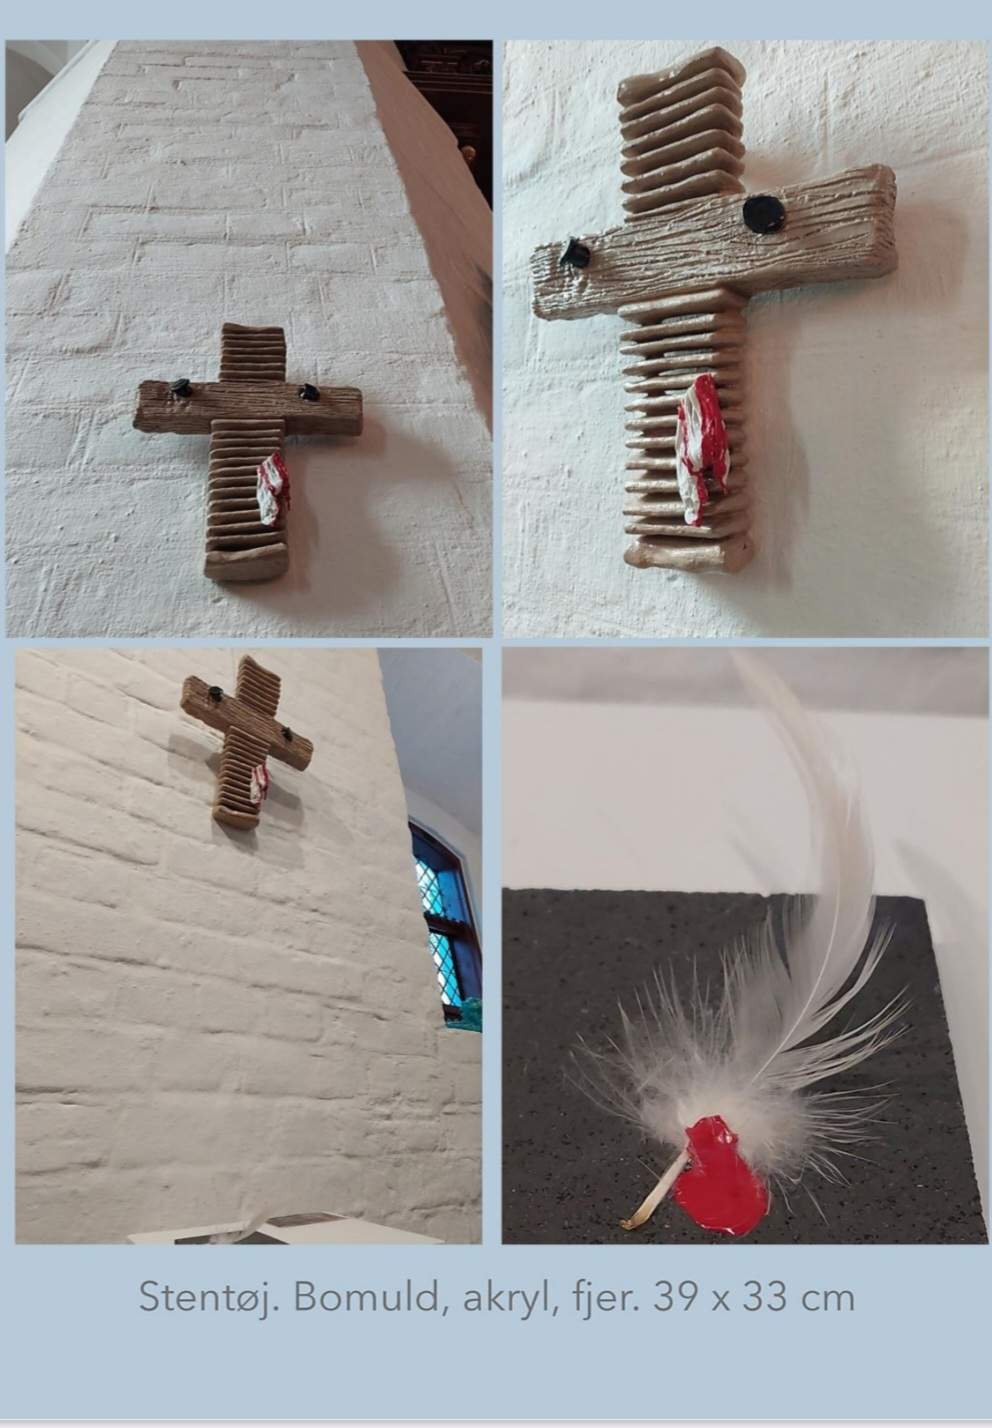 The cross from different angles and the feather with a drop of blood on the floor.